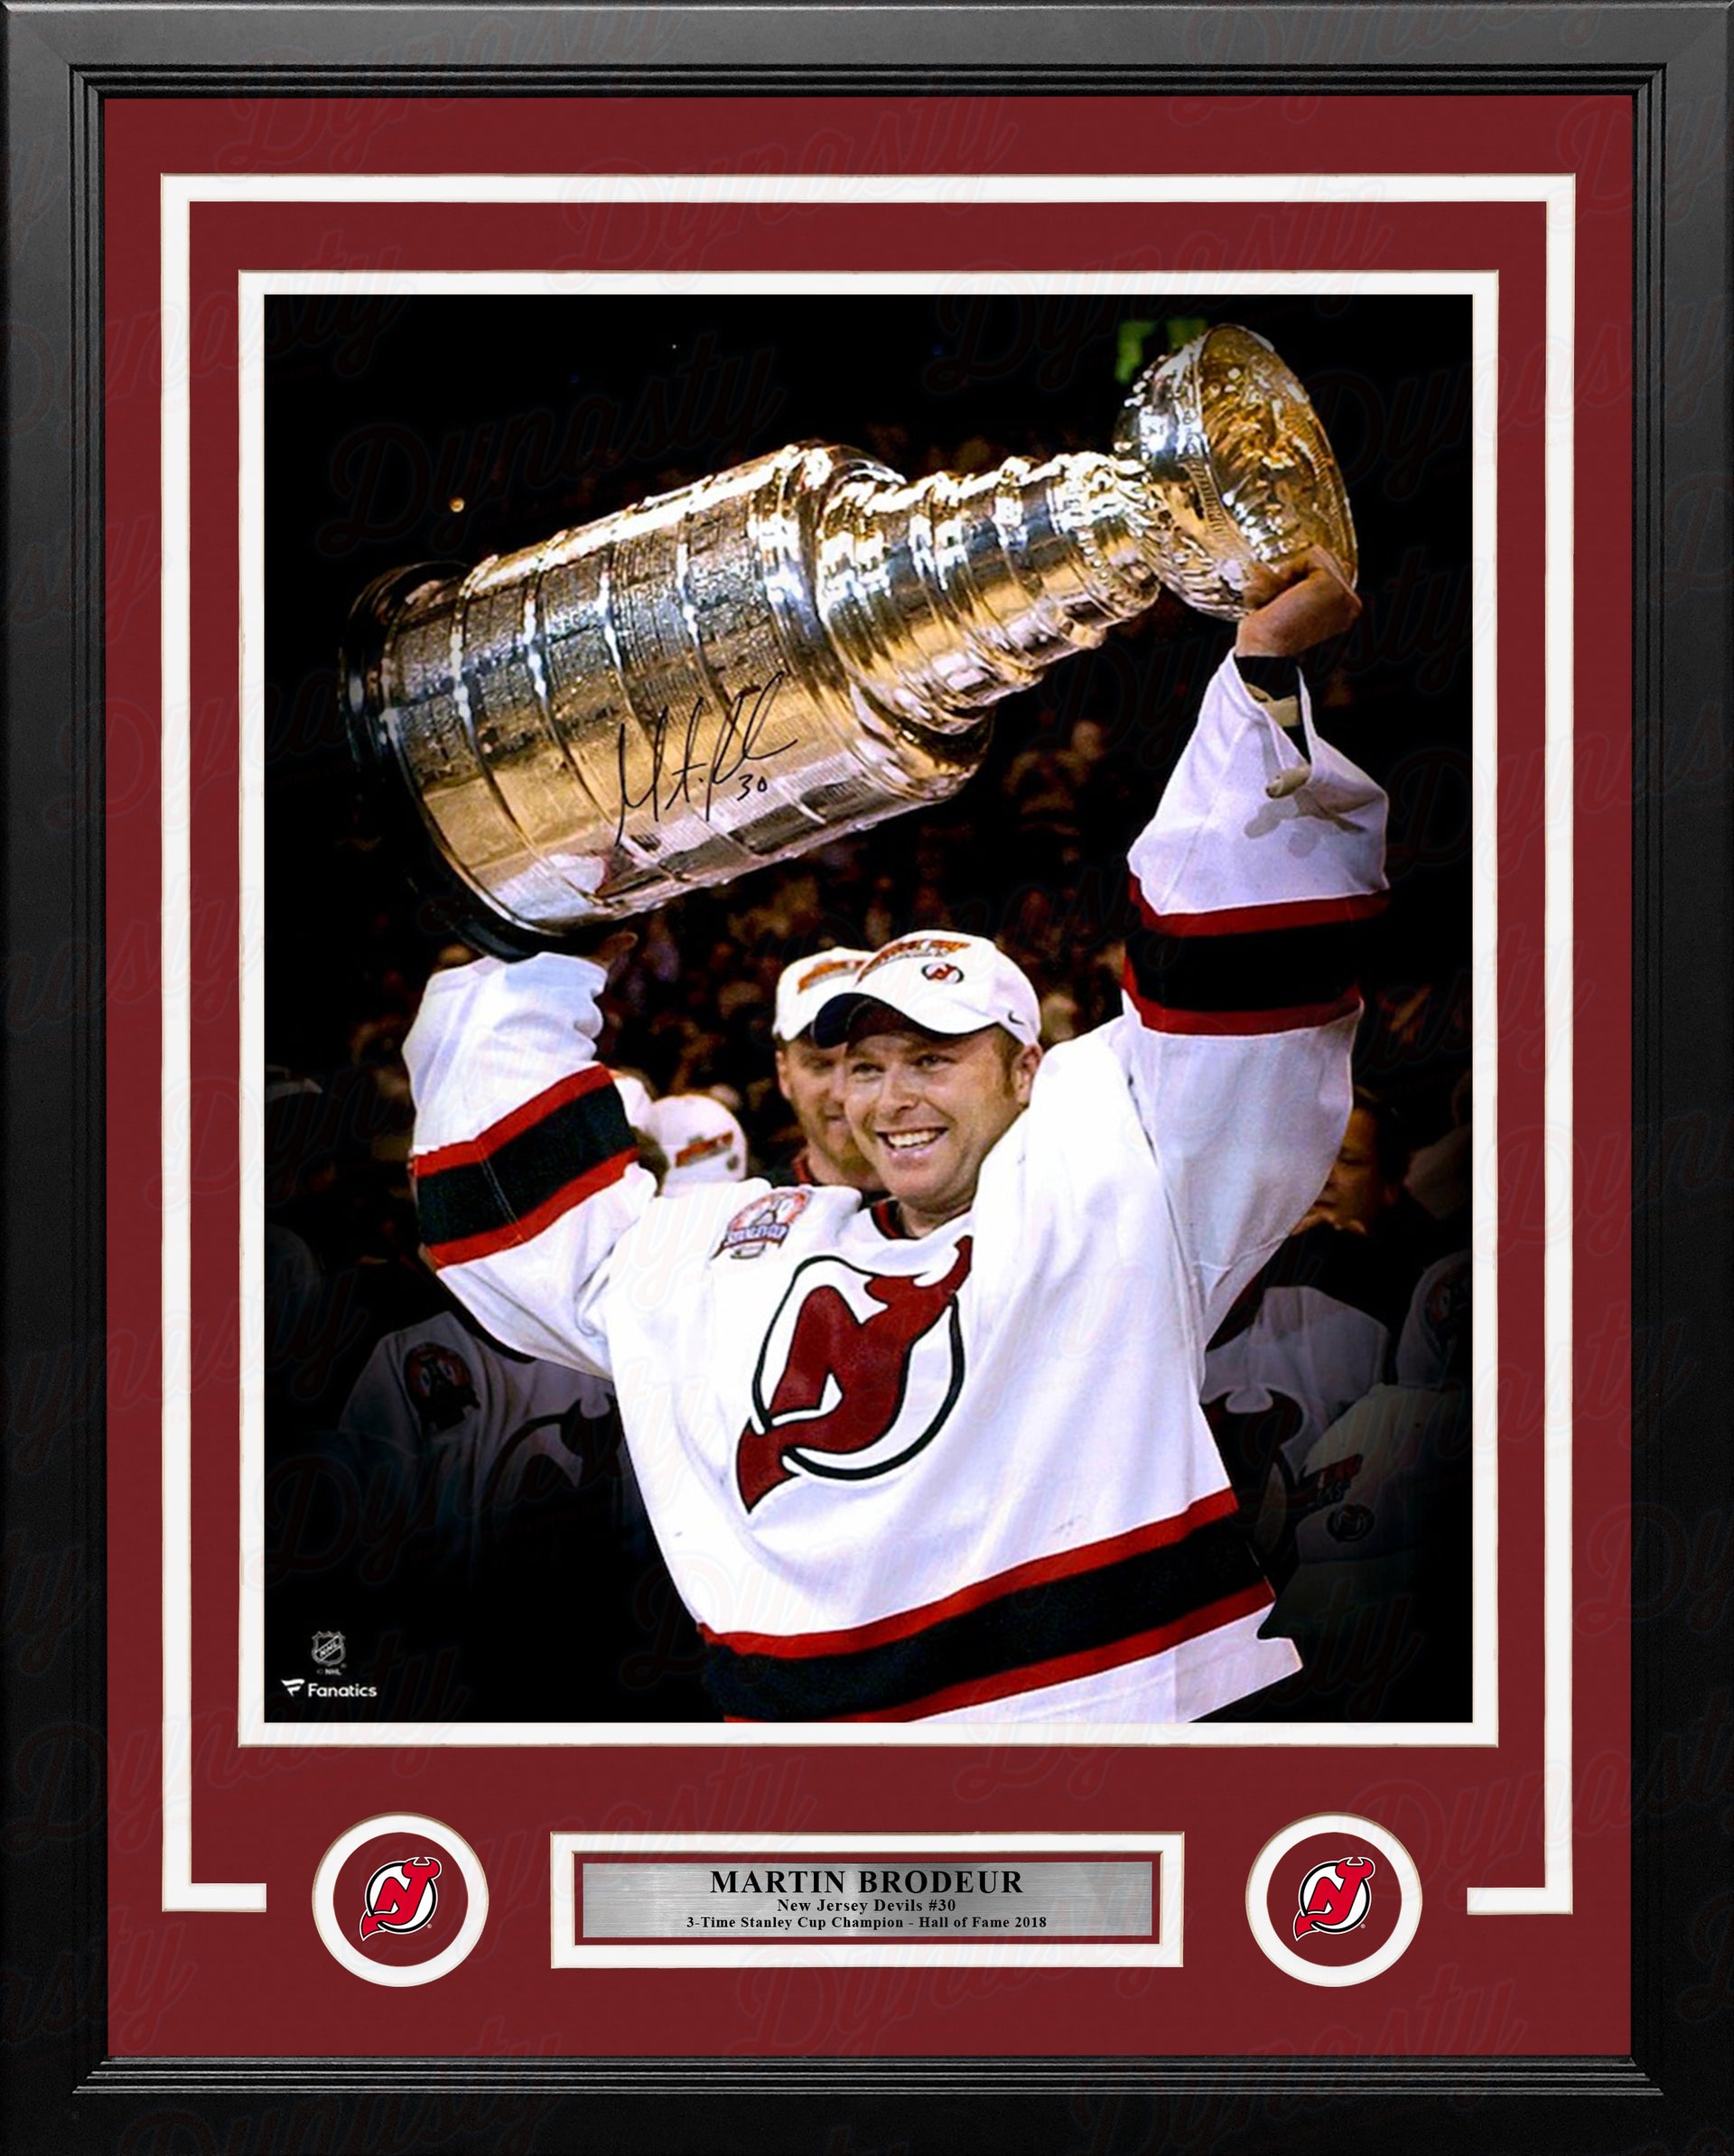 Martin Brodeur Raising the Cup New Jersey Devils Autographed 16" x 20" Framed Hockey Photo - Dynasty Sports & Framing 